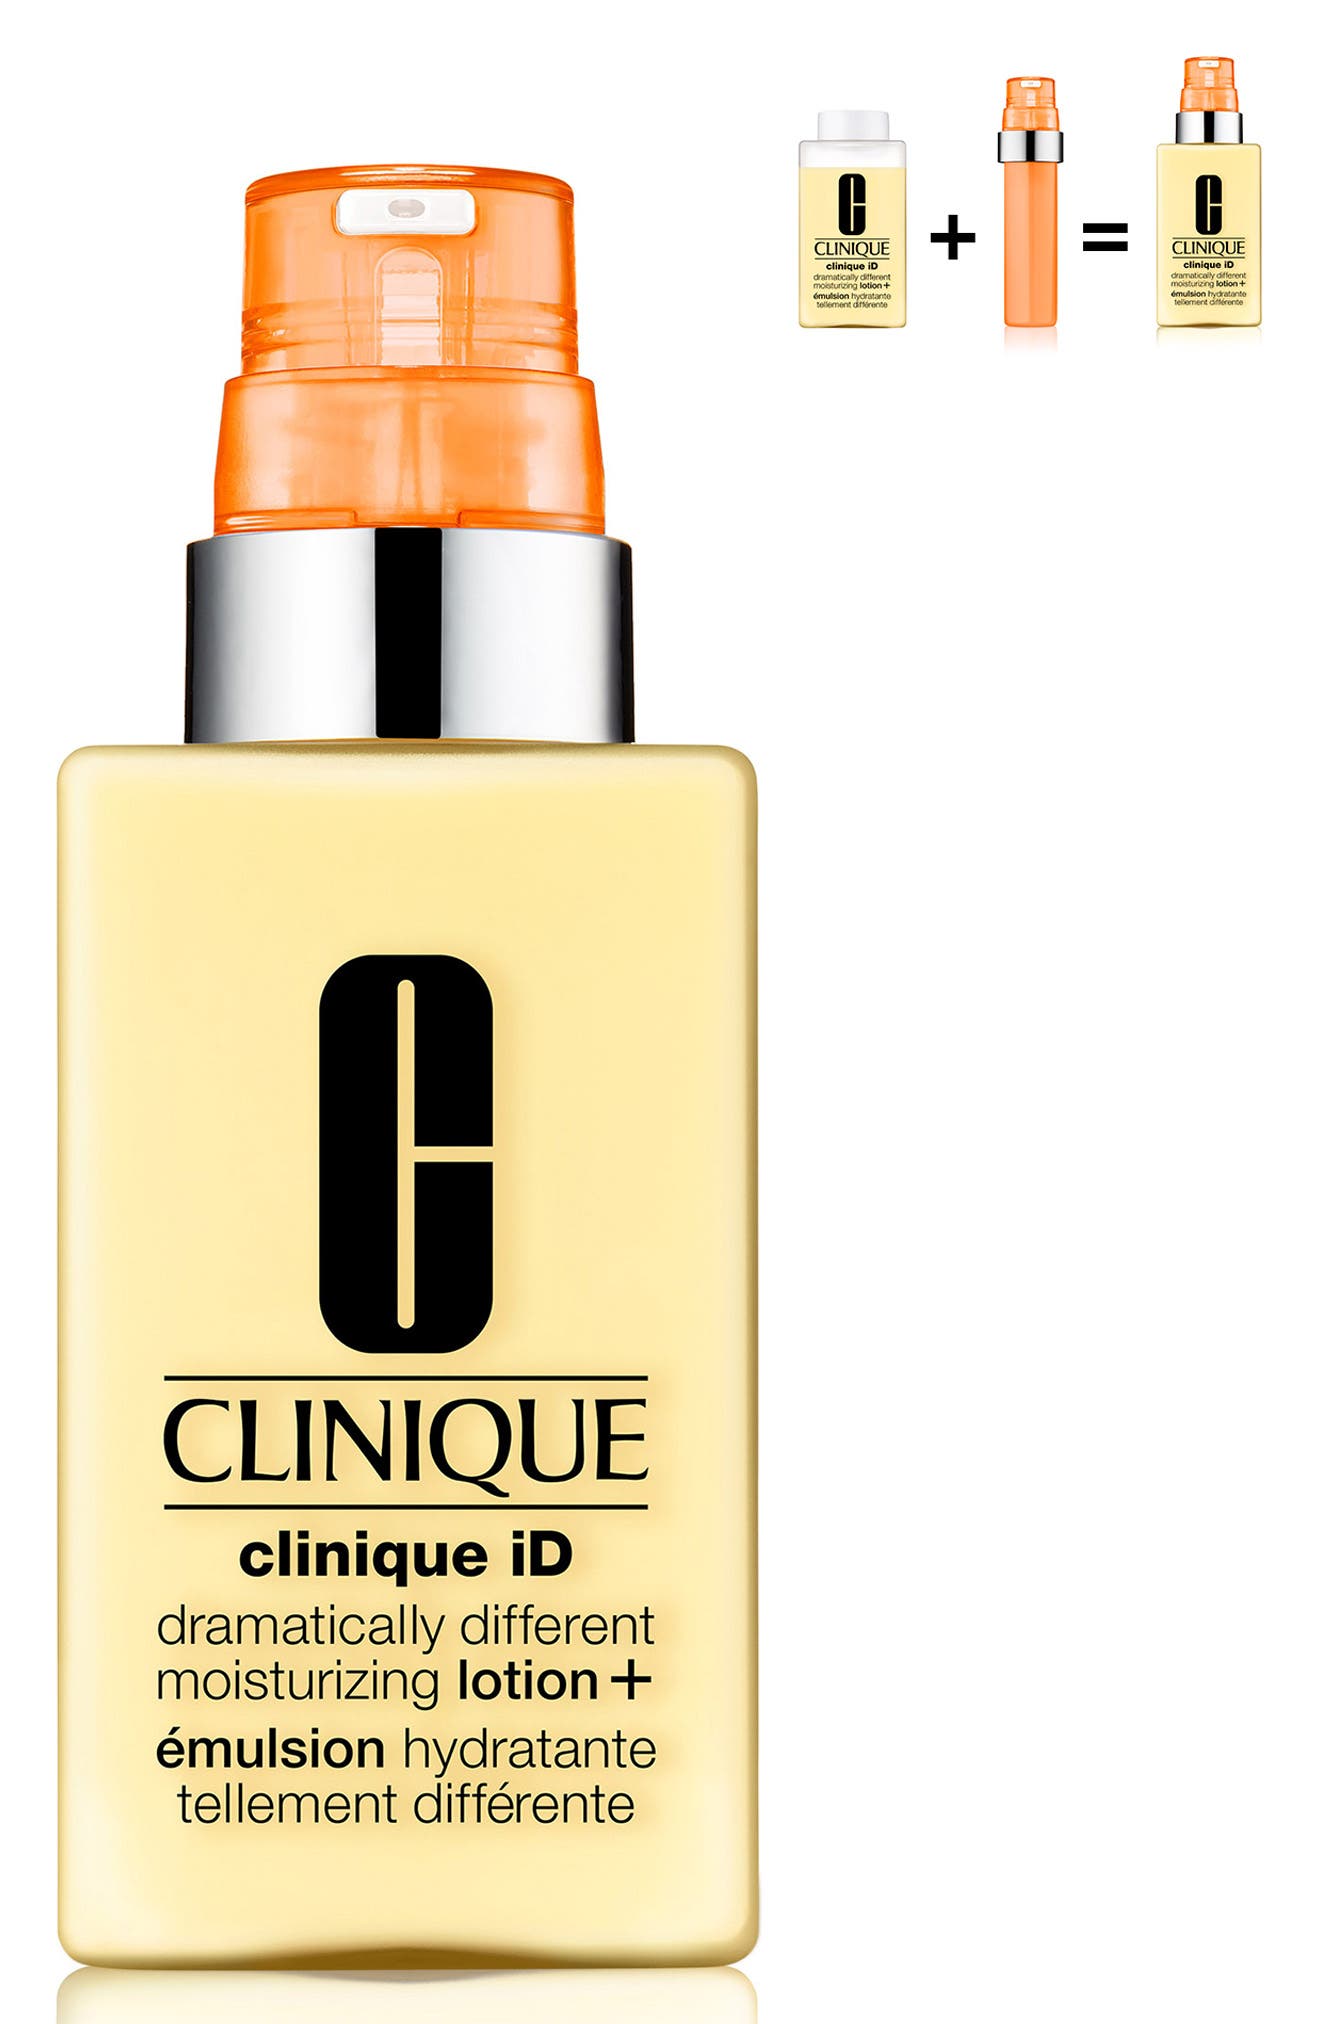 Clinique iD(TM): Moisturizer + Active Cartridge Concentrate(TM) for Fatigue in Moisturizing Lotion/dry Skin at Nordstrom